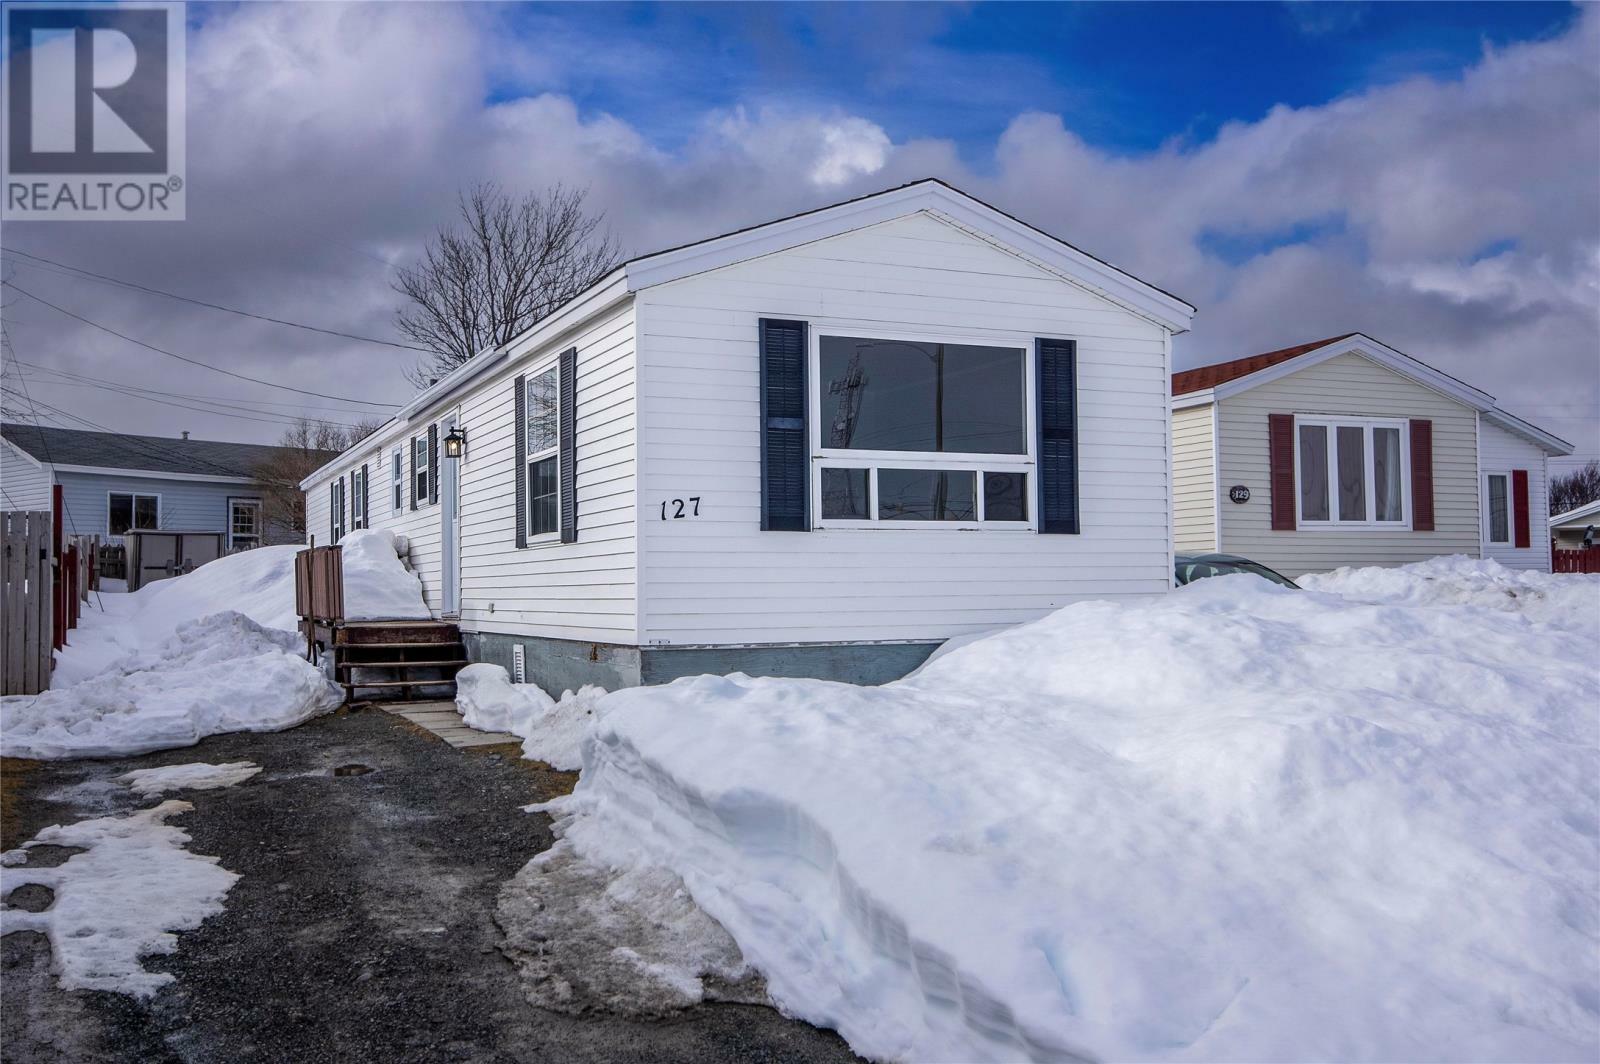 127 Hussey Drive  St. John'S NL A1A 4Y6 photo